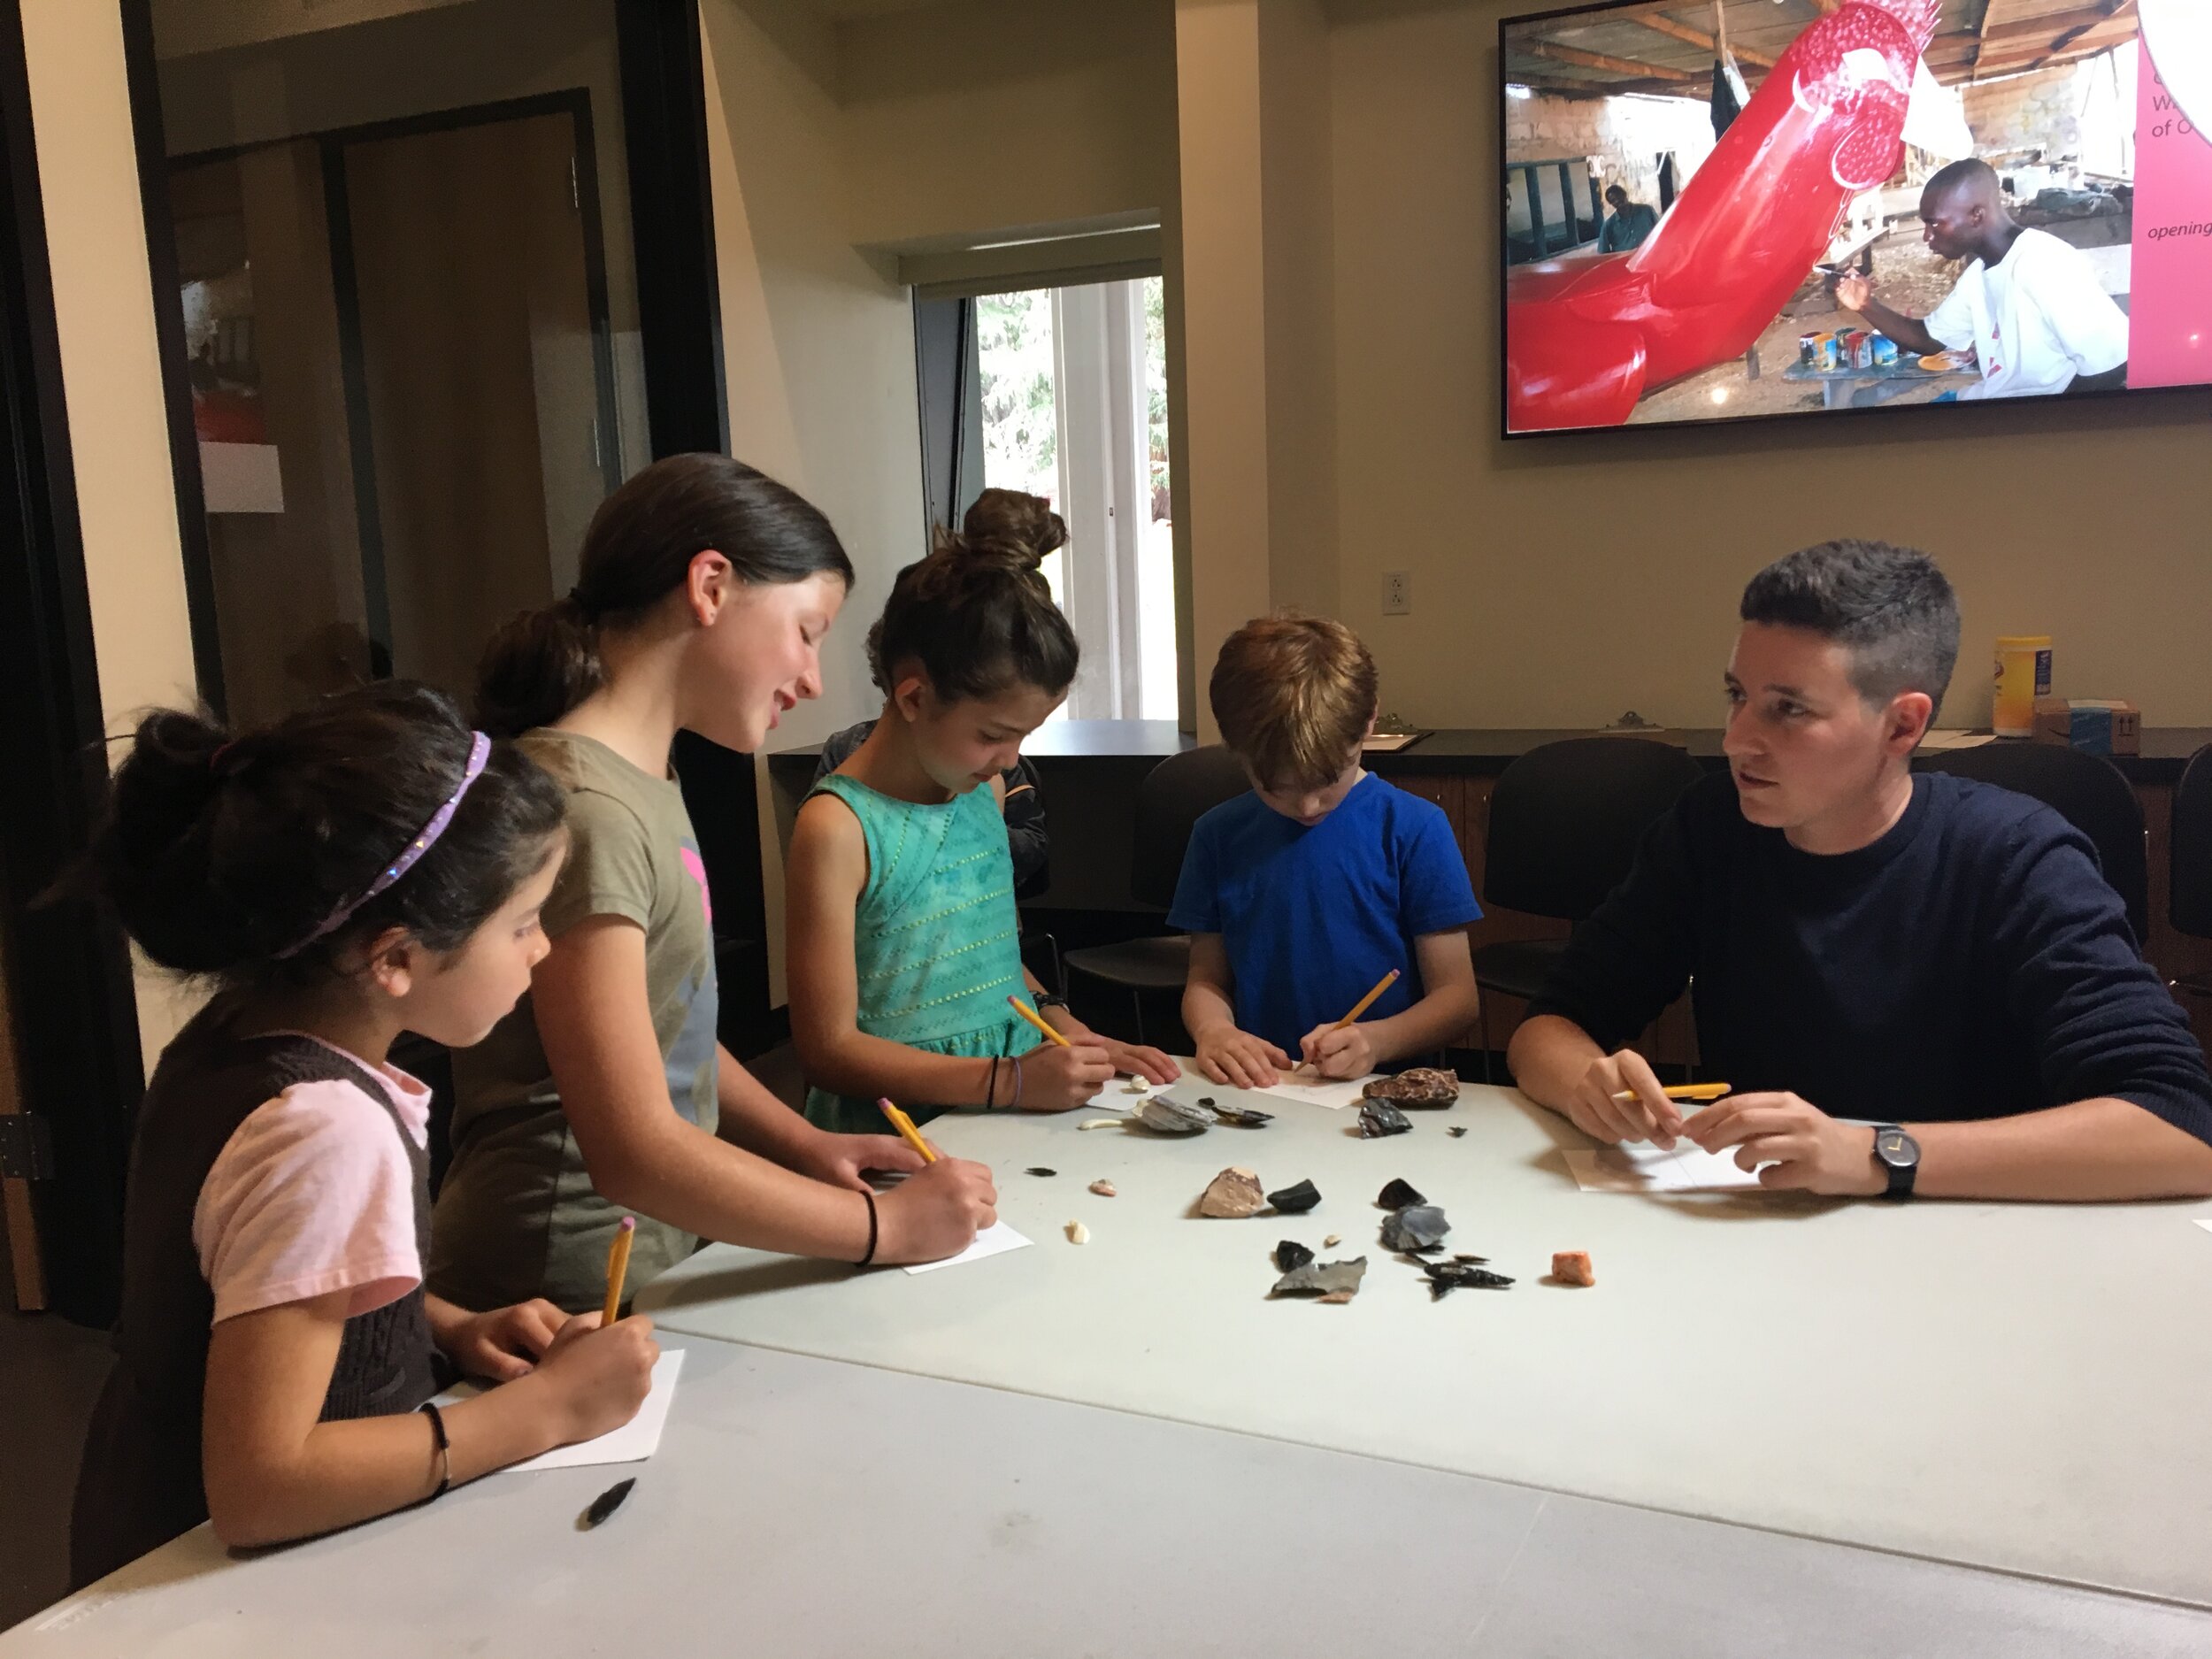 Katie Fleming, Gallery Manager & Education Coordinator at the Phoebe A. Hearst Museum of Anthropology, working with four children on a creative project.